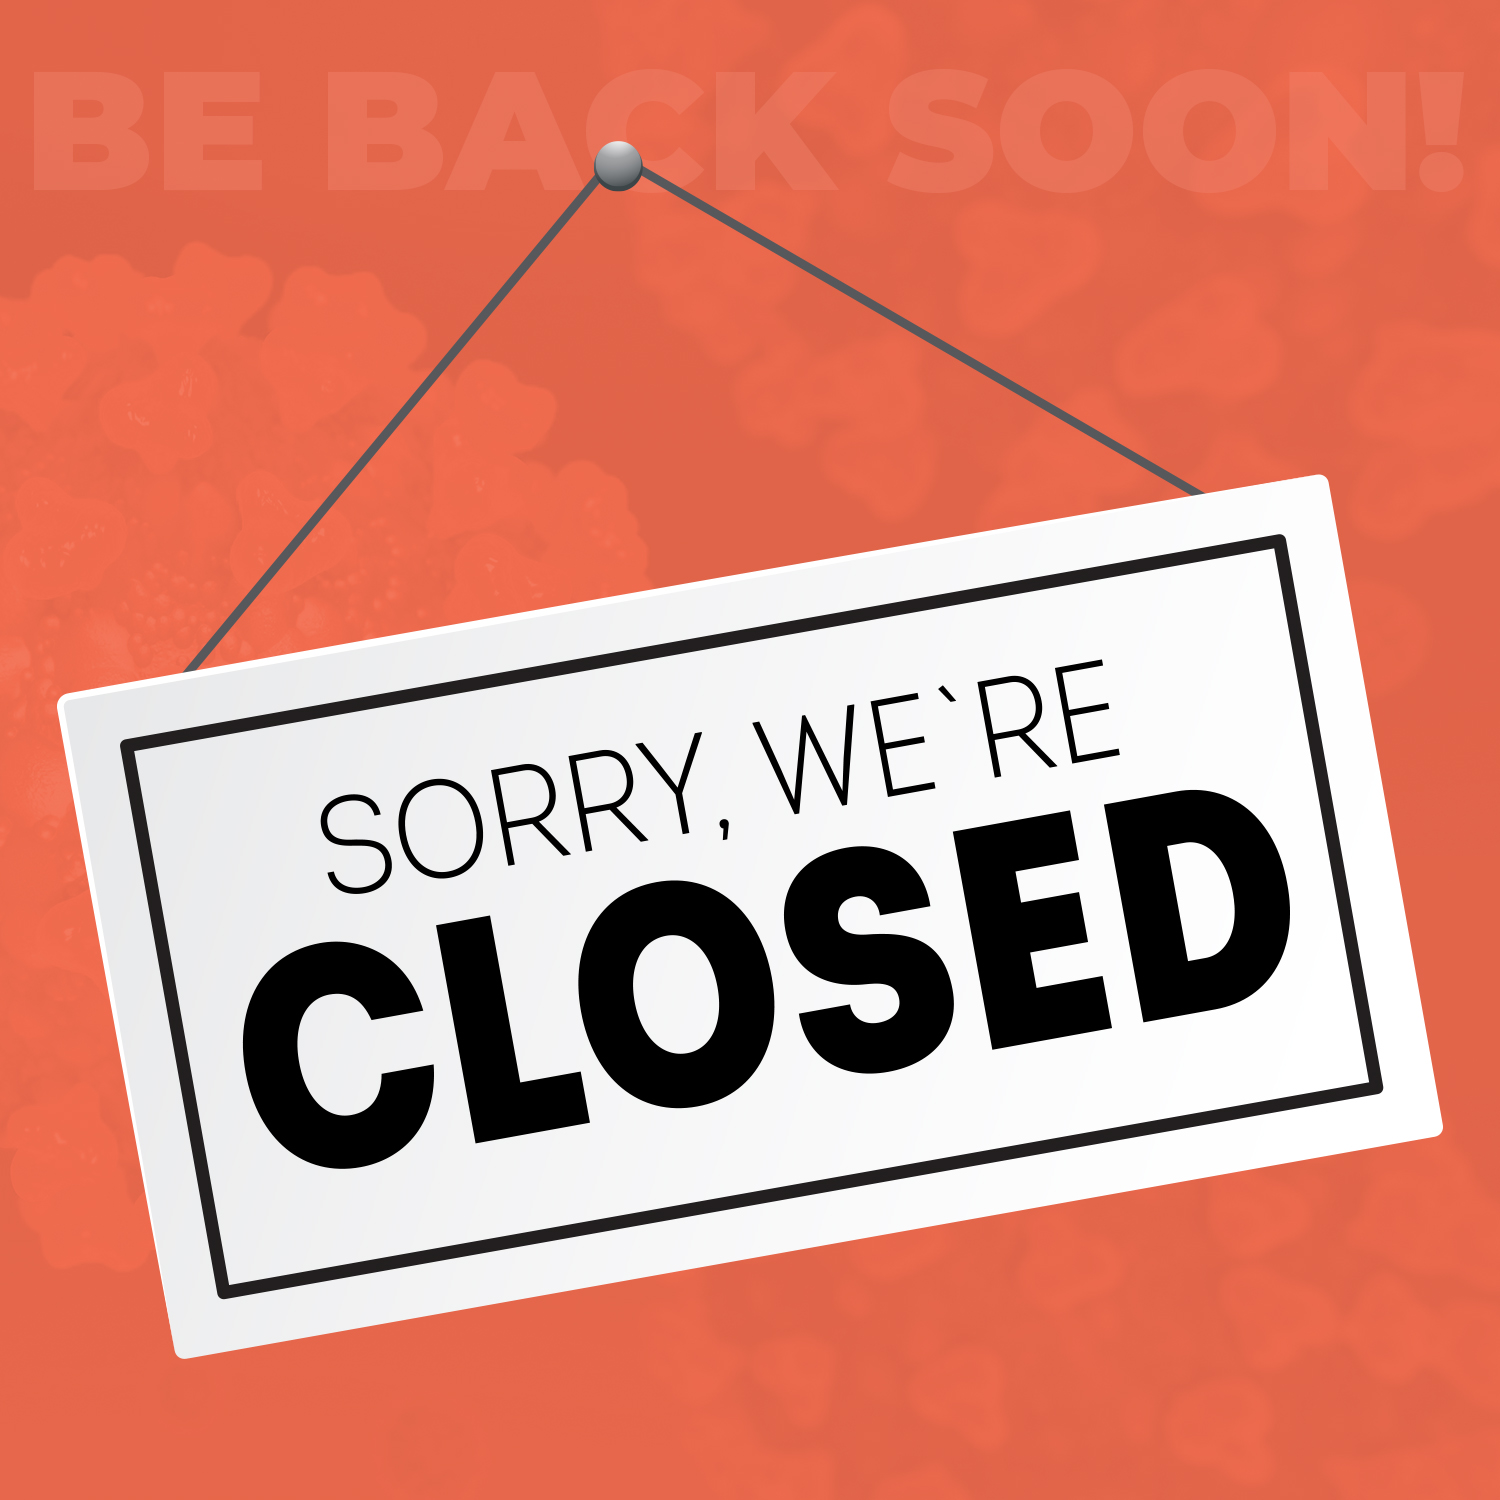 sorry we're closed image